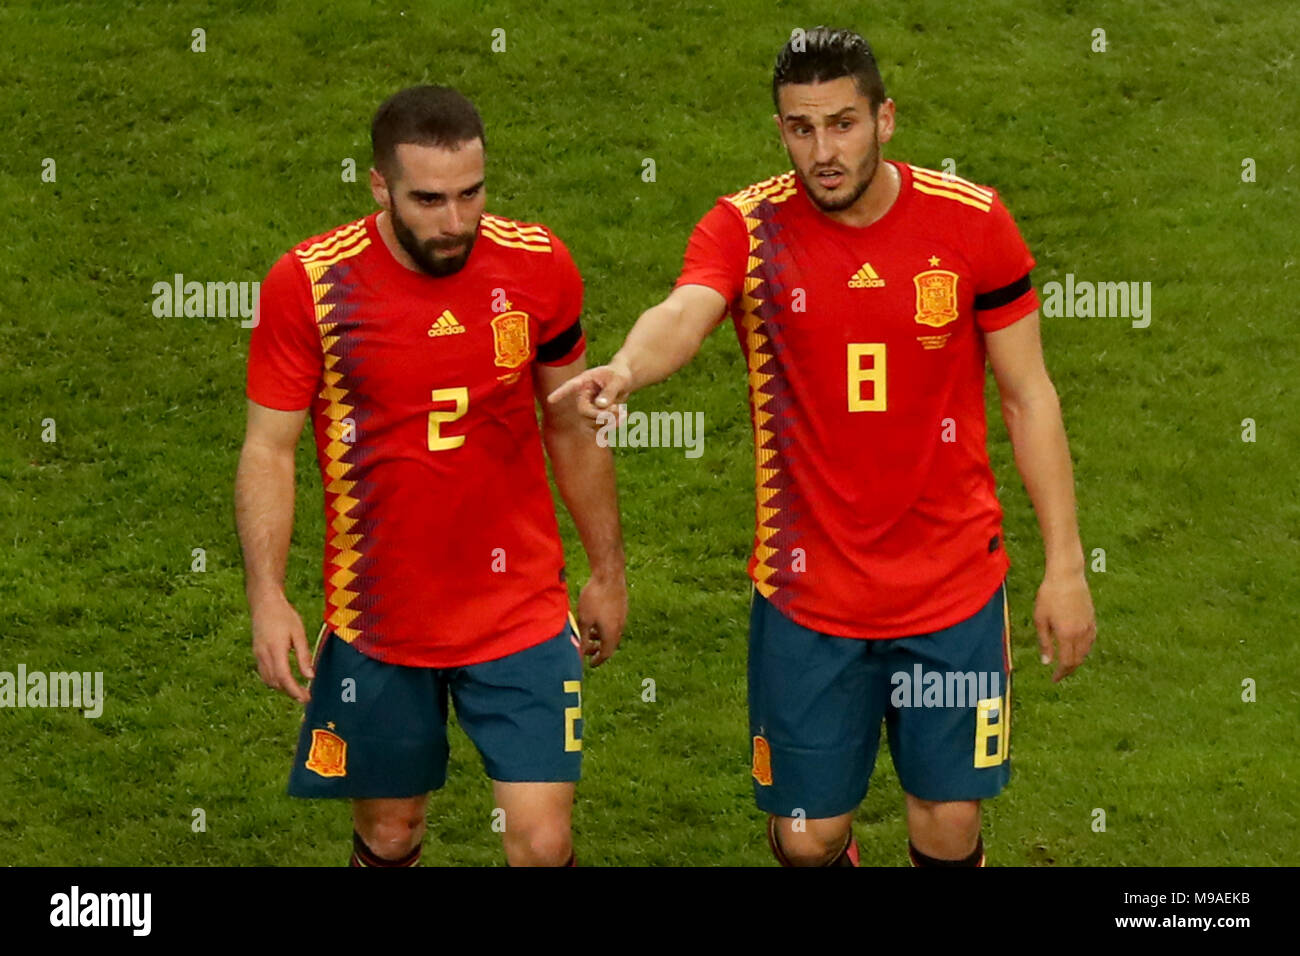 Soccer: Friendly match, Germany vs Spain, 23 March 2018 in the ESPRIT arena, Duesseldorf, Germany: Spain's Daniel Carvajal (L) and Koke walking during half-time. Photo: Christian Charisius/dpa Stock Photo